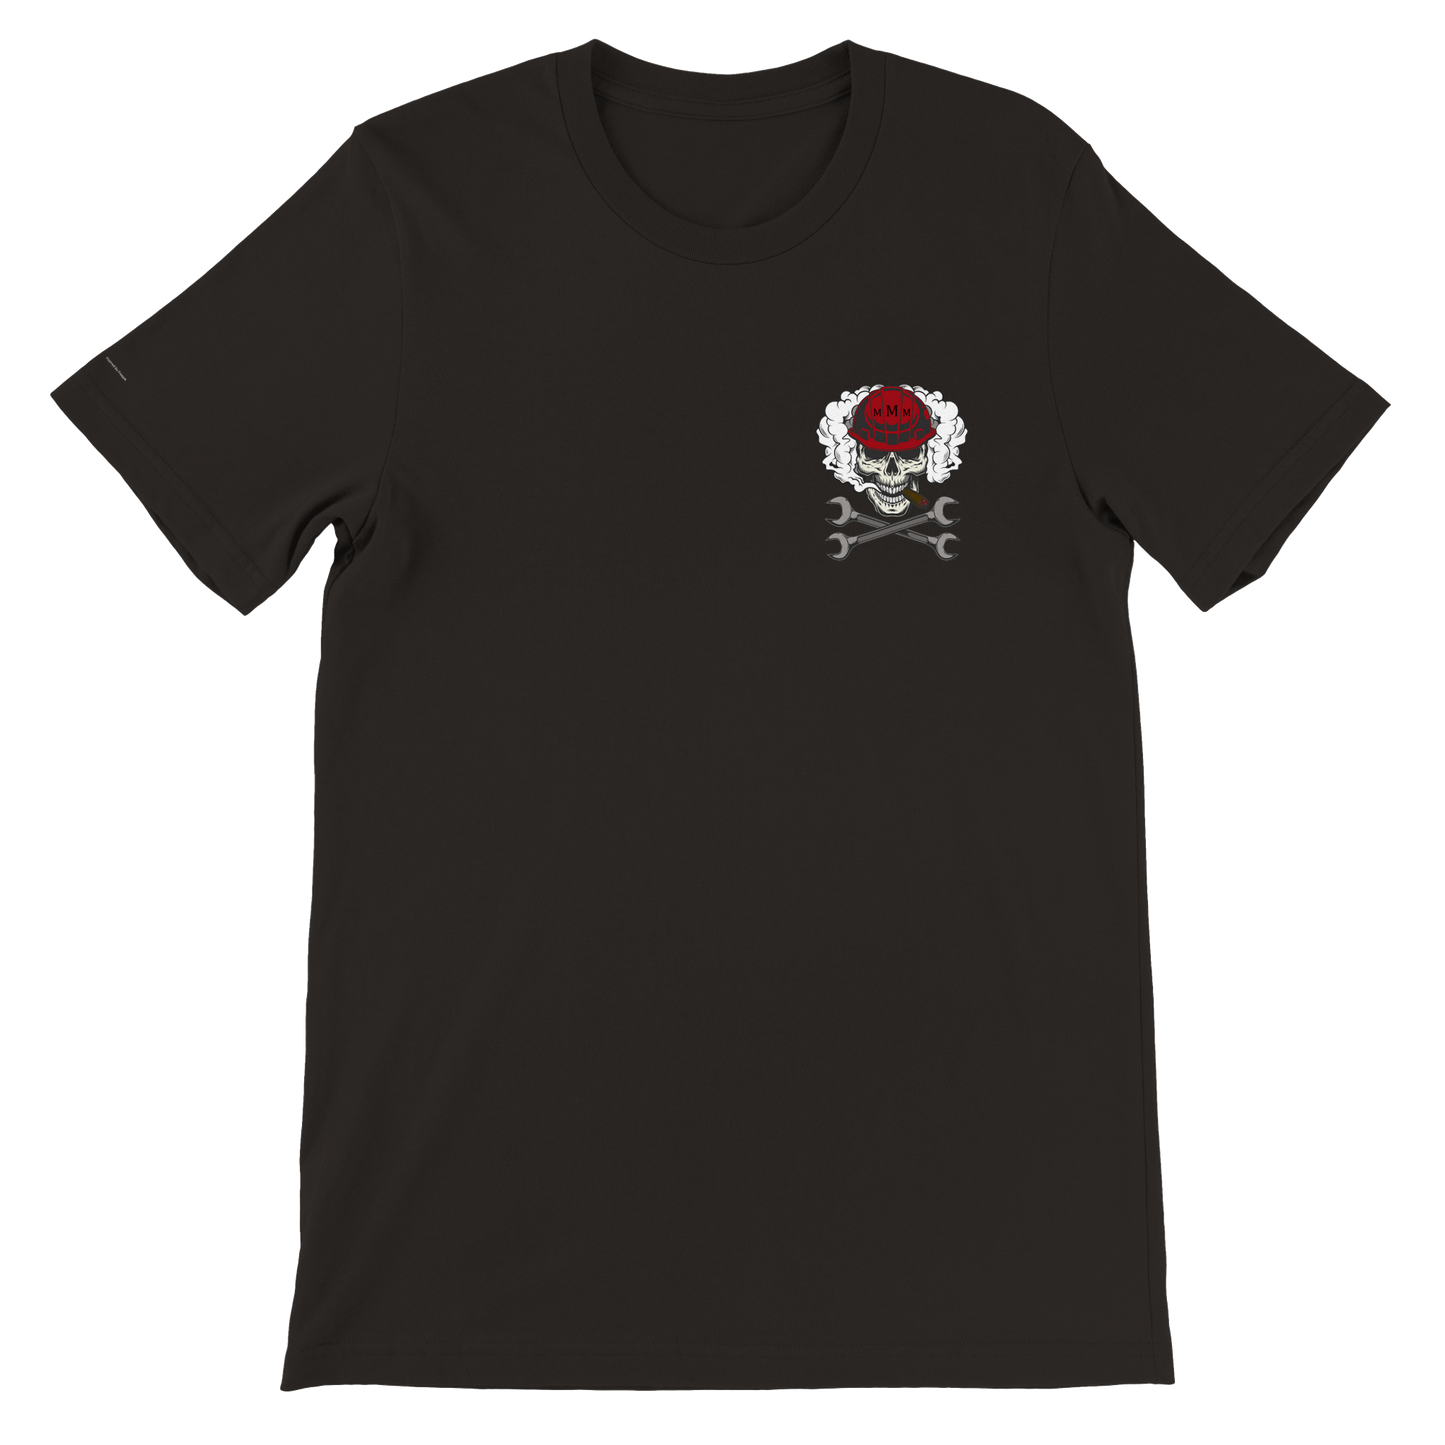 MMM T-shirt: First edition Red - Premium